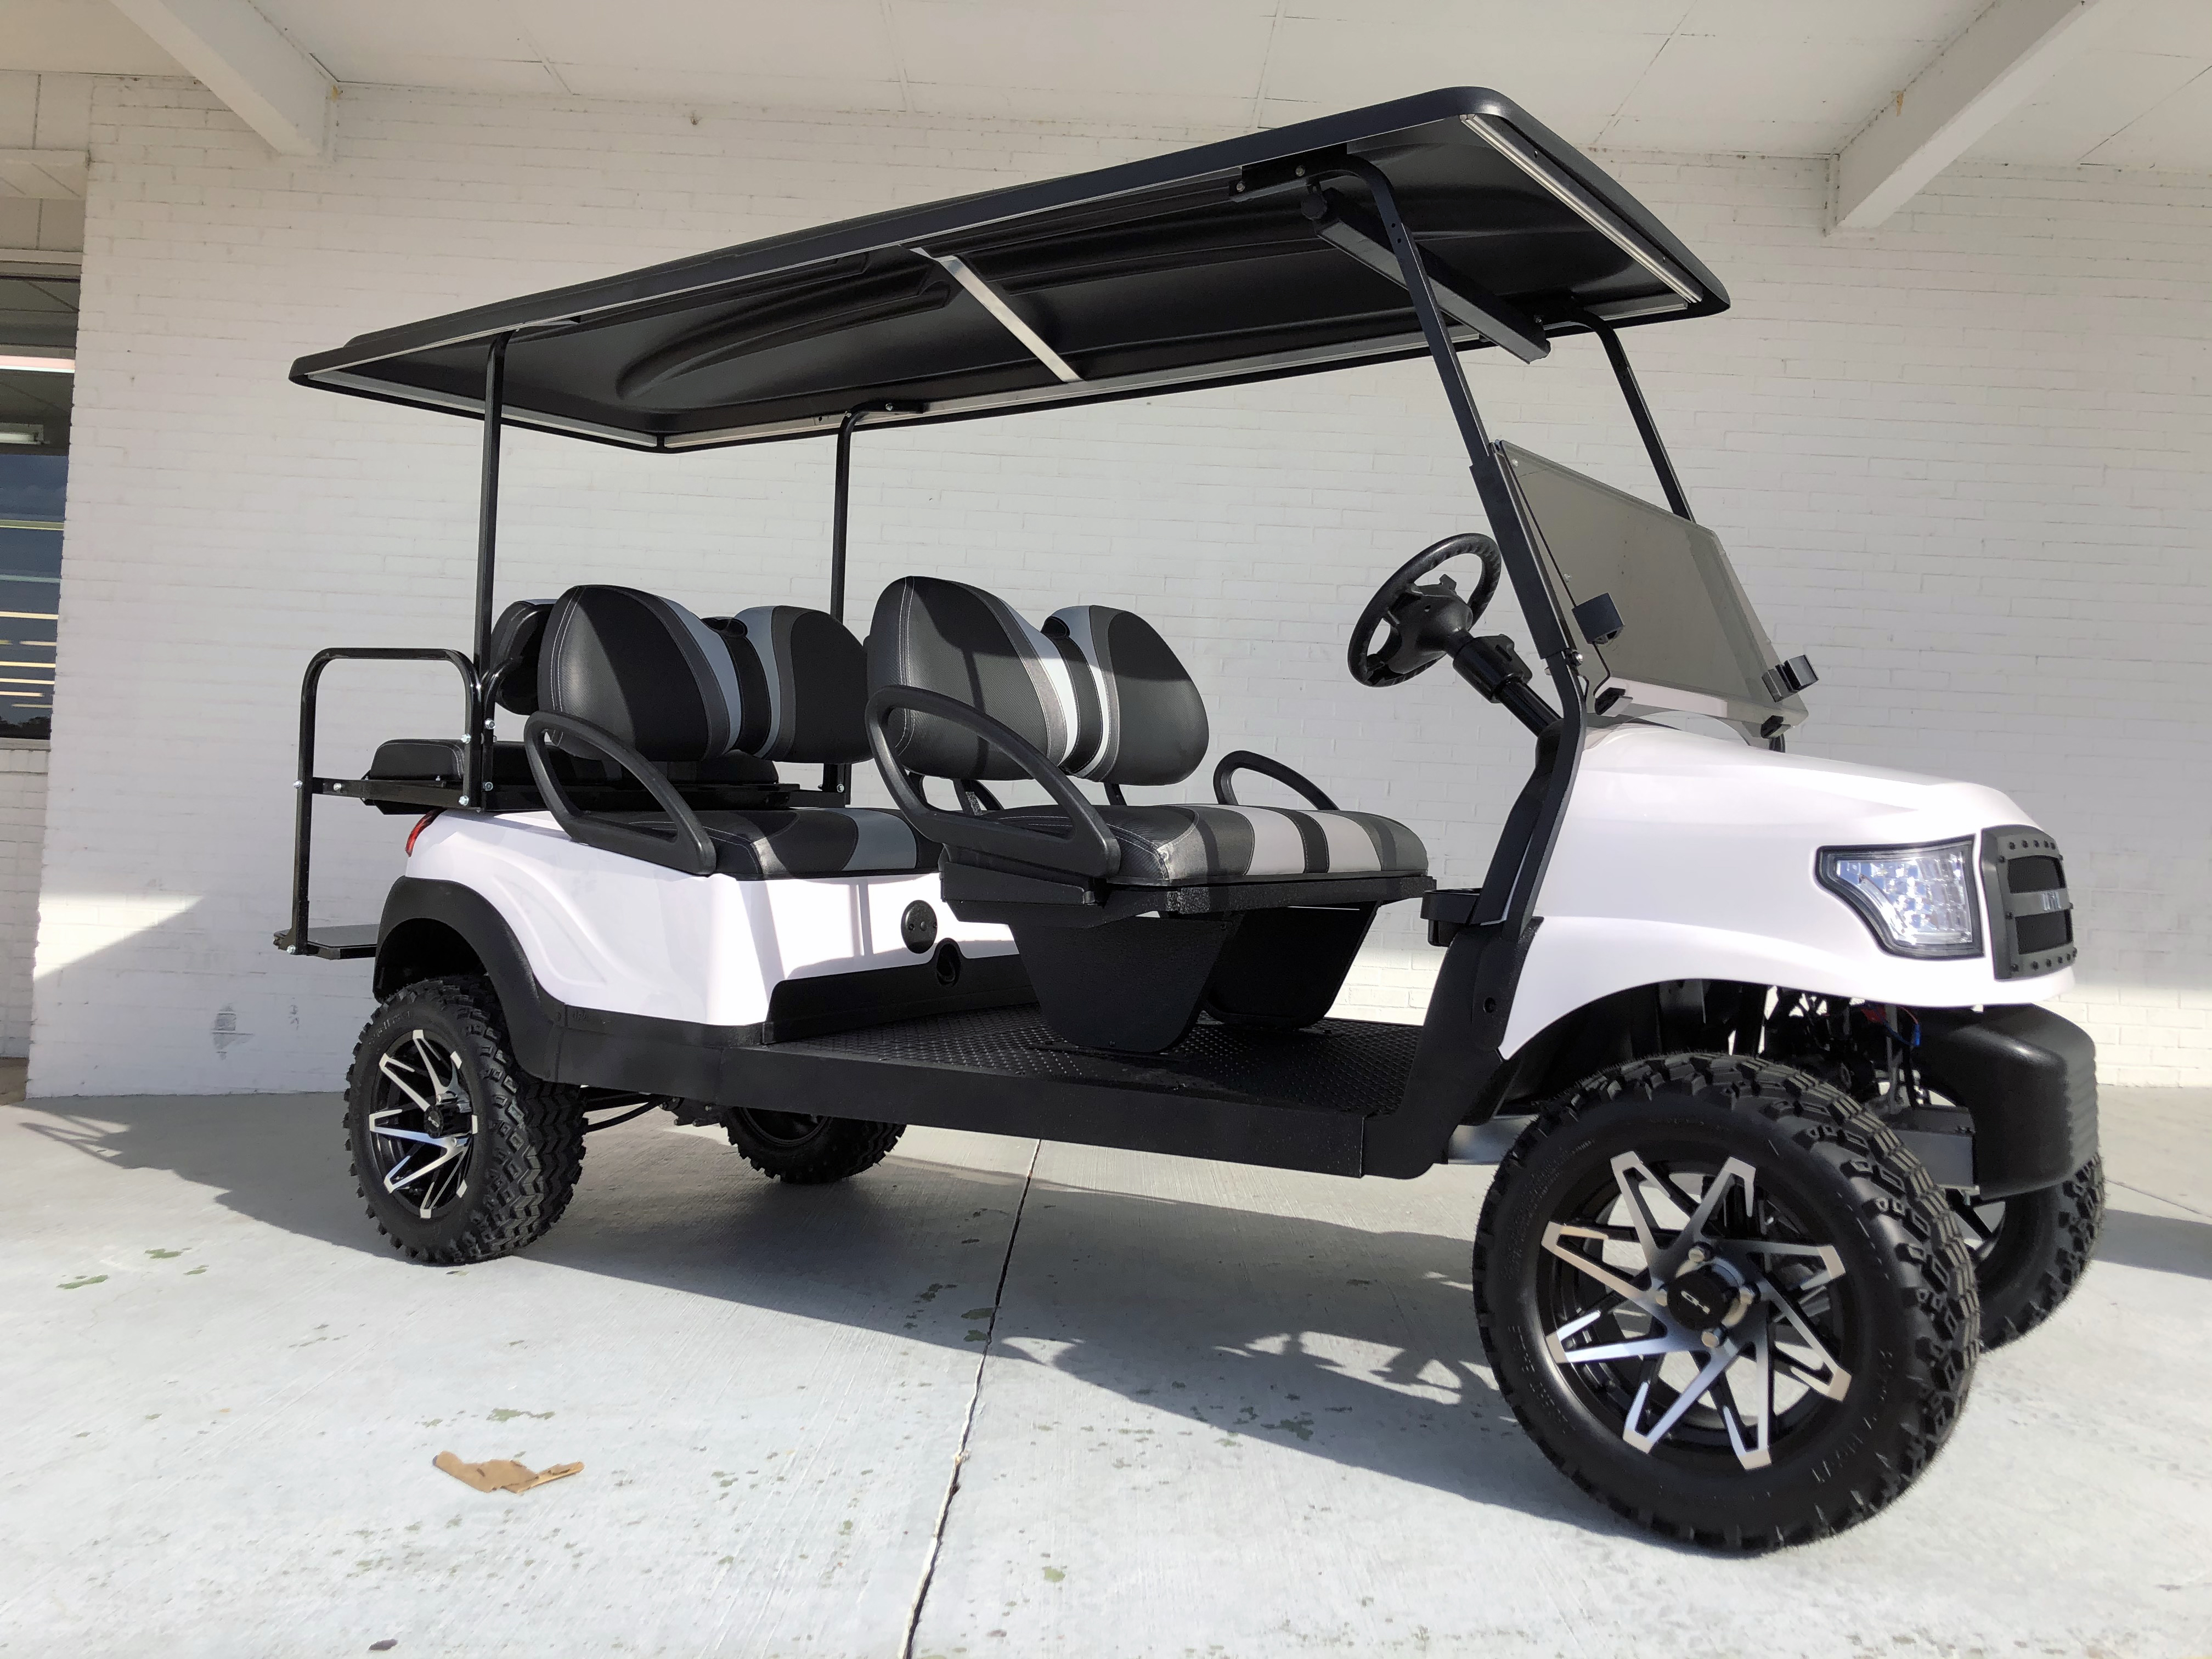 White Alpha Lifted 6 Passenger Limo Club Car Golf Cart Golf Carts Lifted